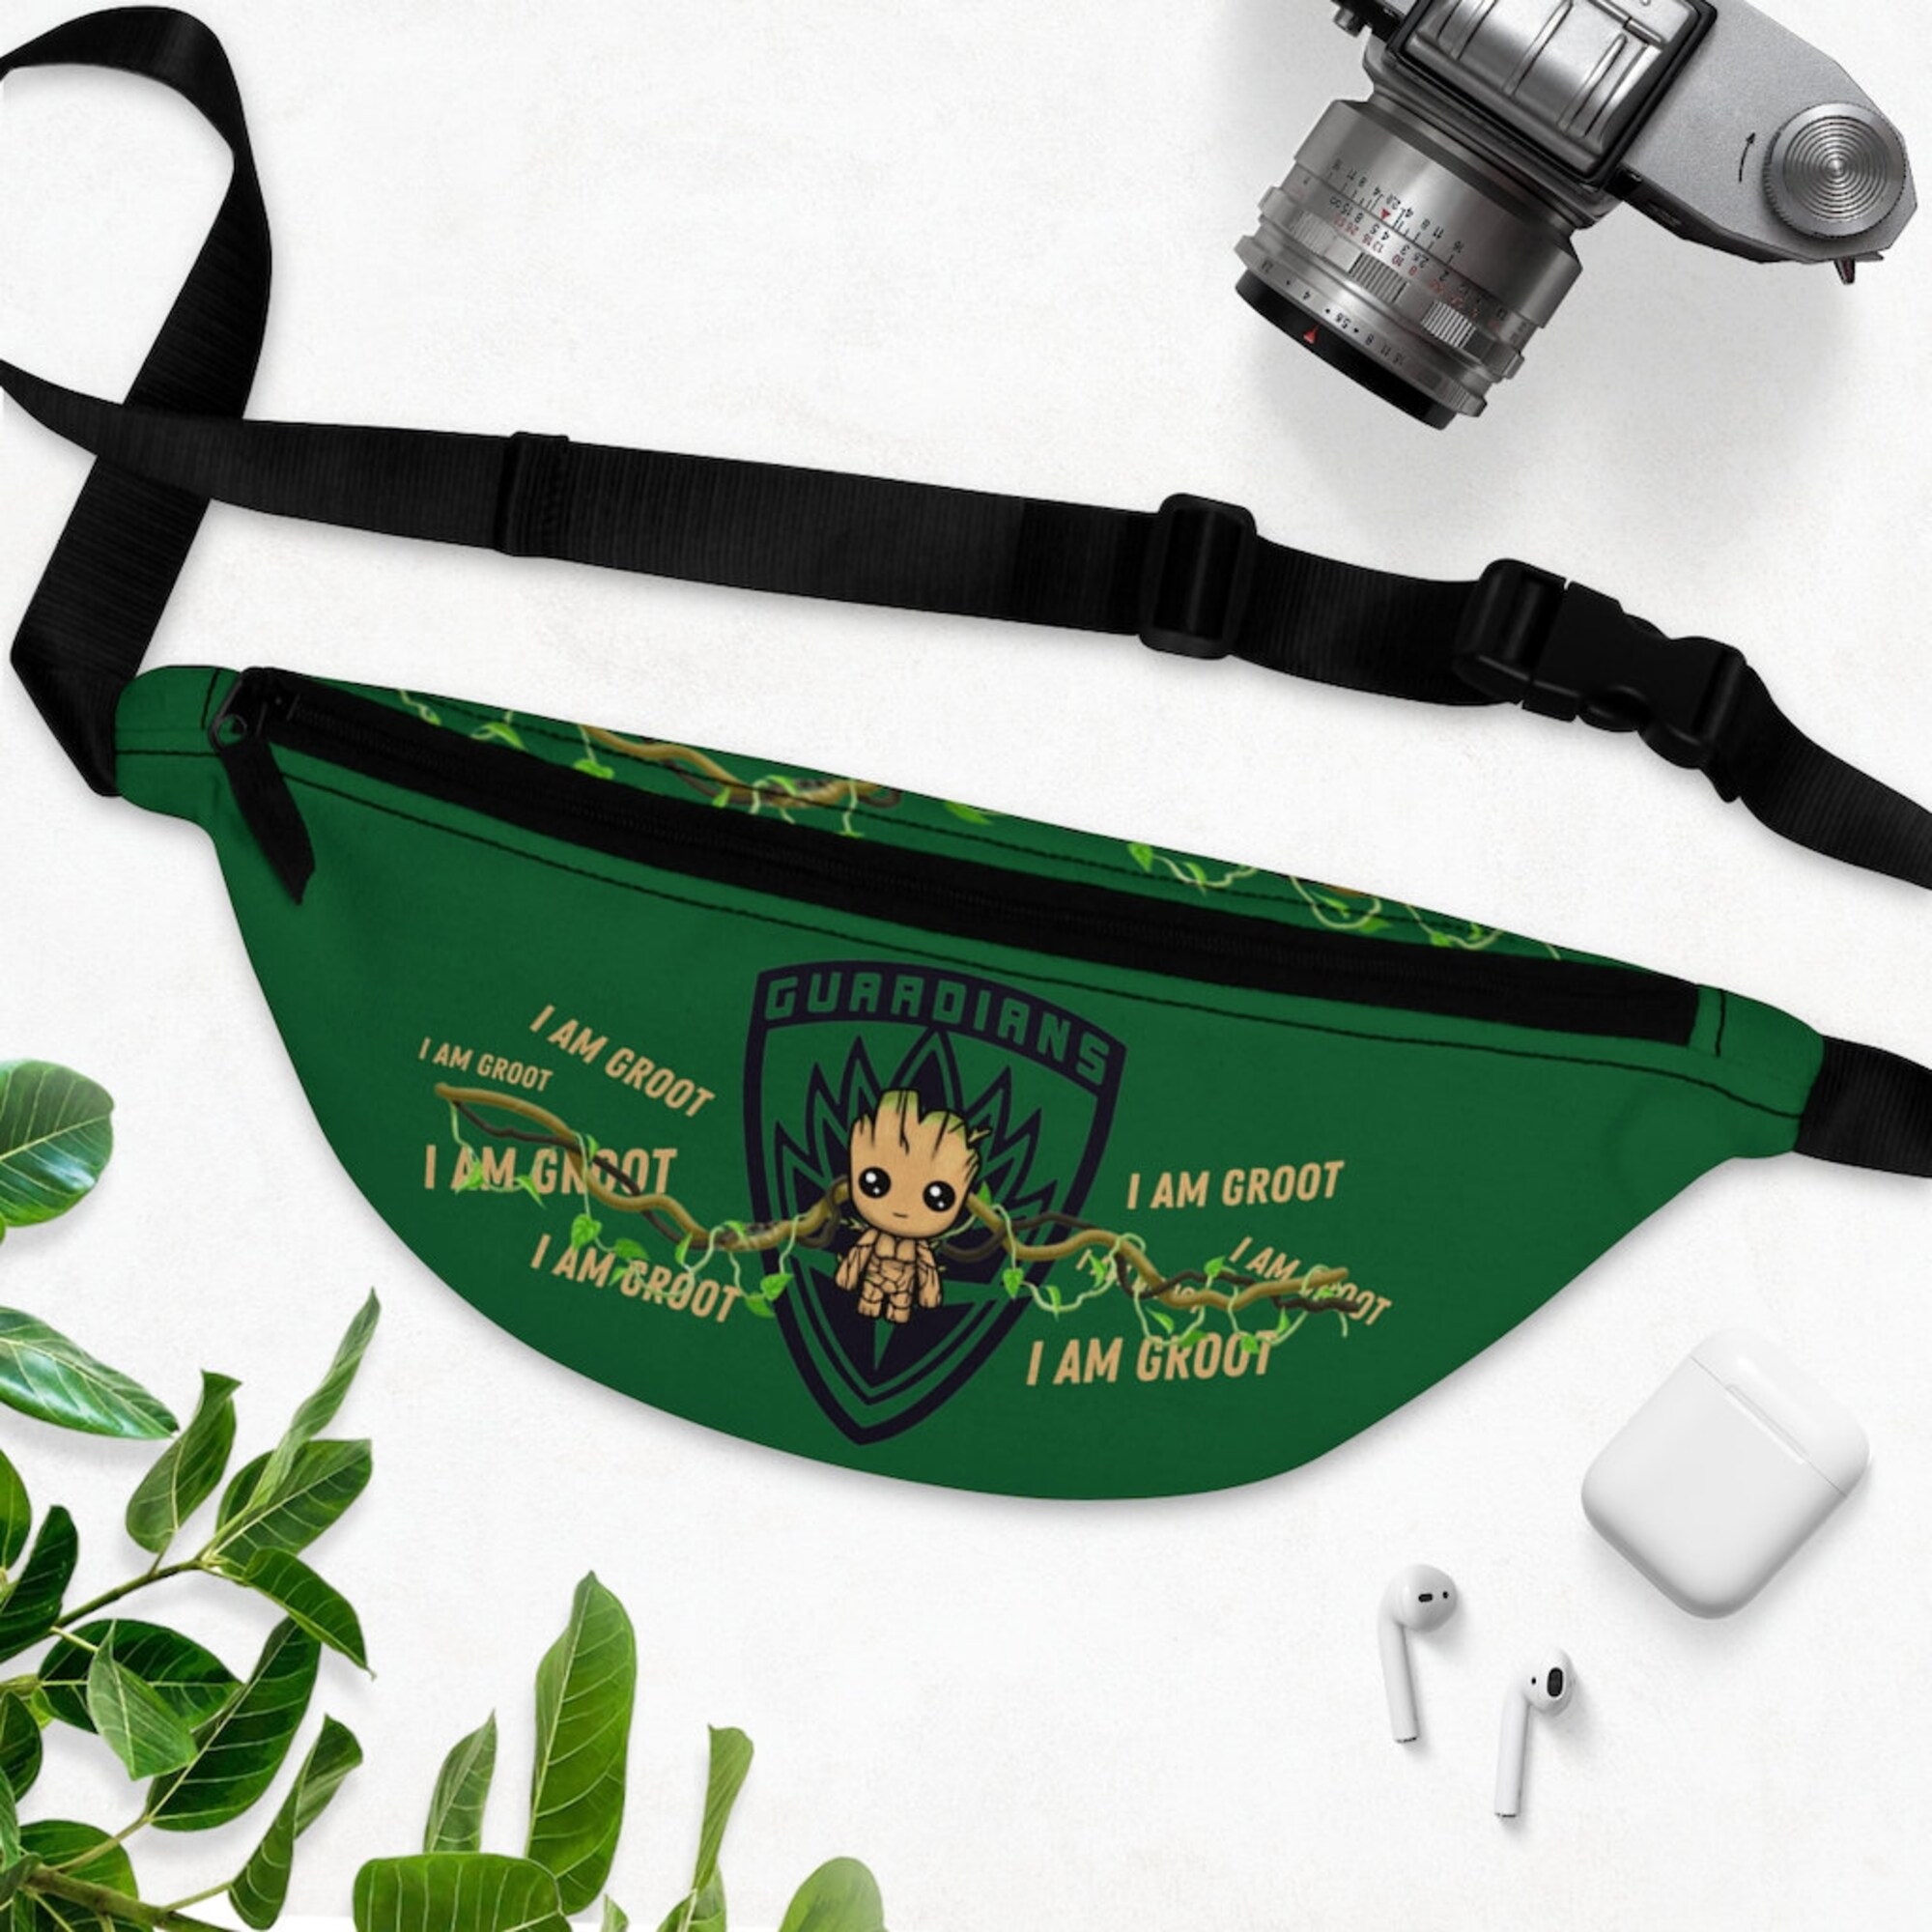 Groot Fanny Pack, Groot Bag, Guardians of the Galaxy Fanny Pack